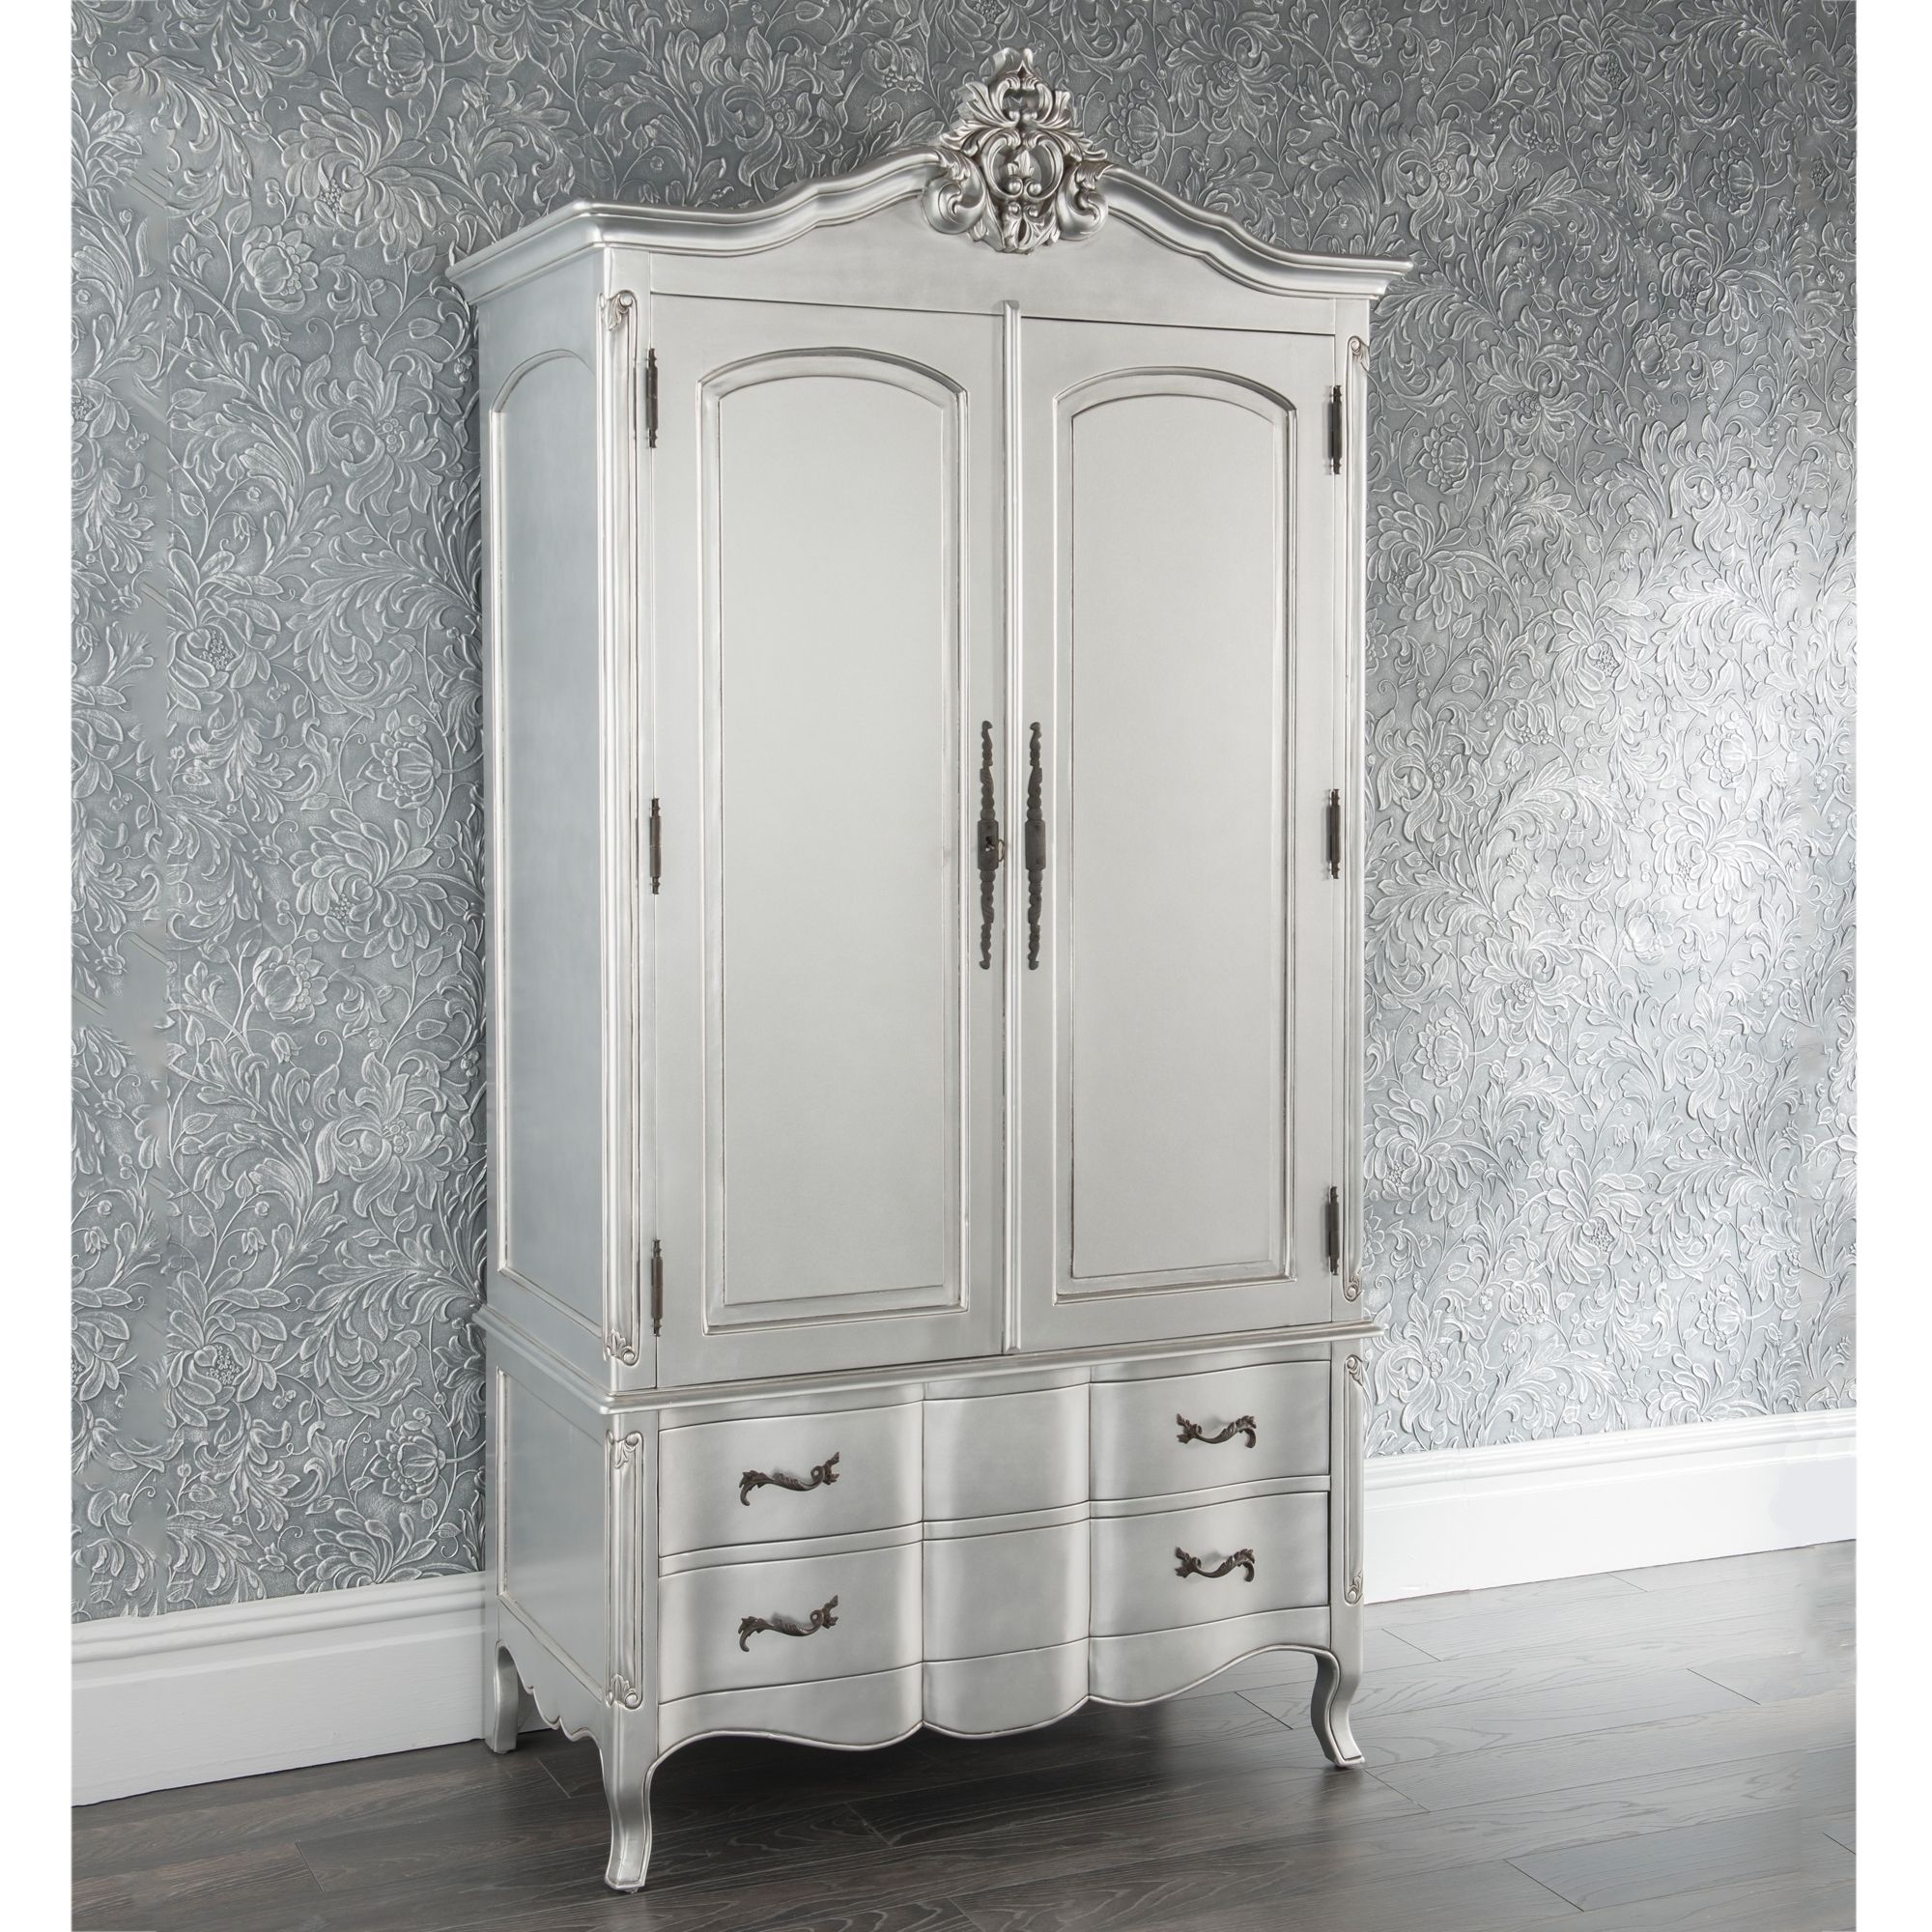 Estelle Antique French Style Wardrobe | French Style Furniture Throughout Silver French Wardrobes (Gallery 3 of 20)